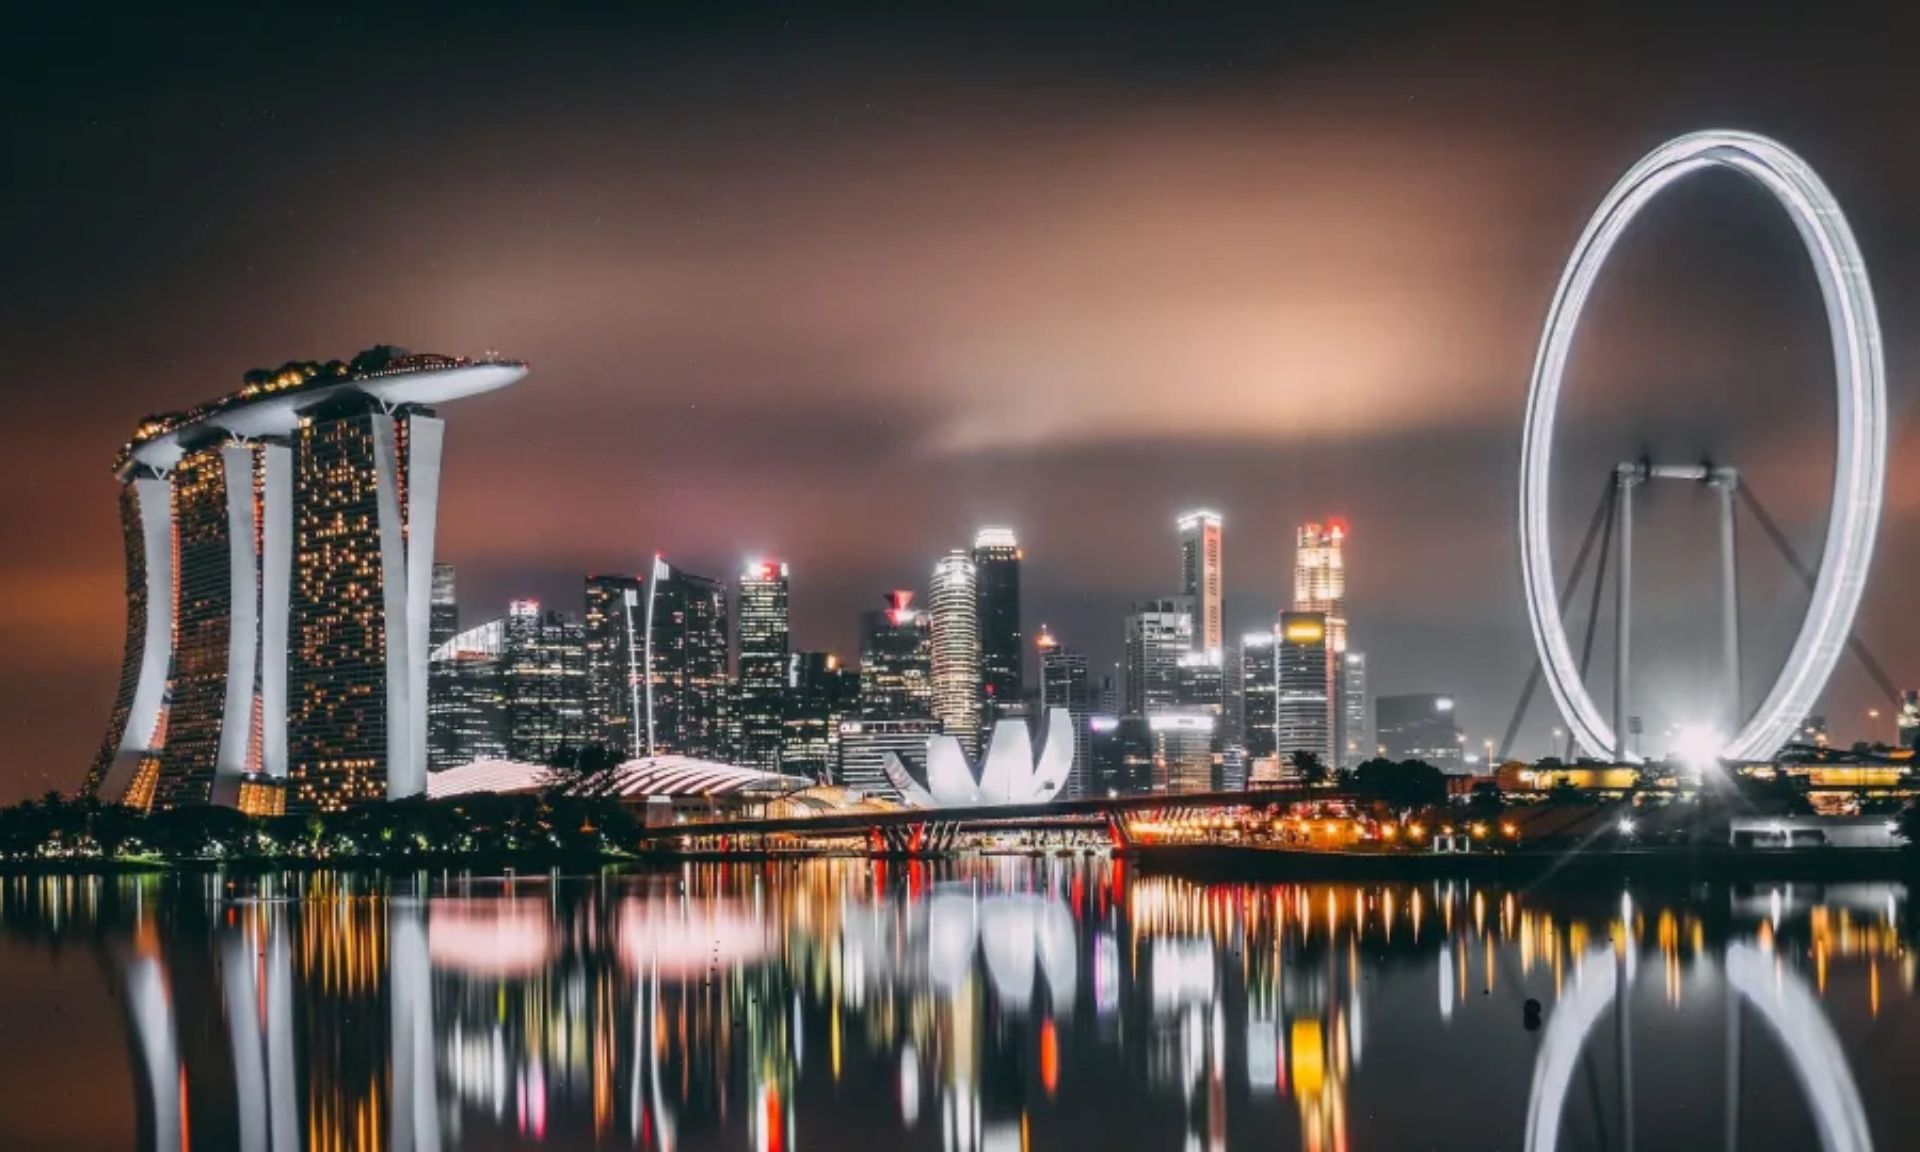 Singapore has expanded the scope of what cryptocurrency-related activities it regulates to include custodial services, the Monetary Authority of Singapore (MAS) announced on Tuesday.